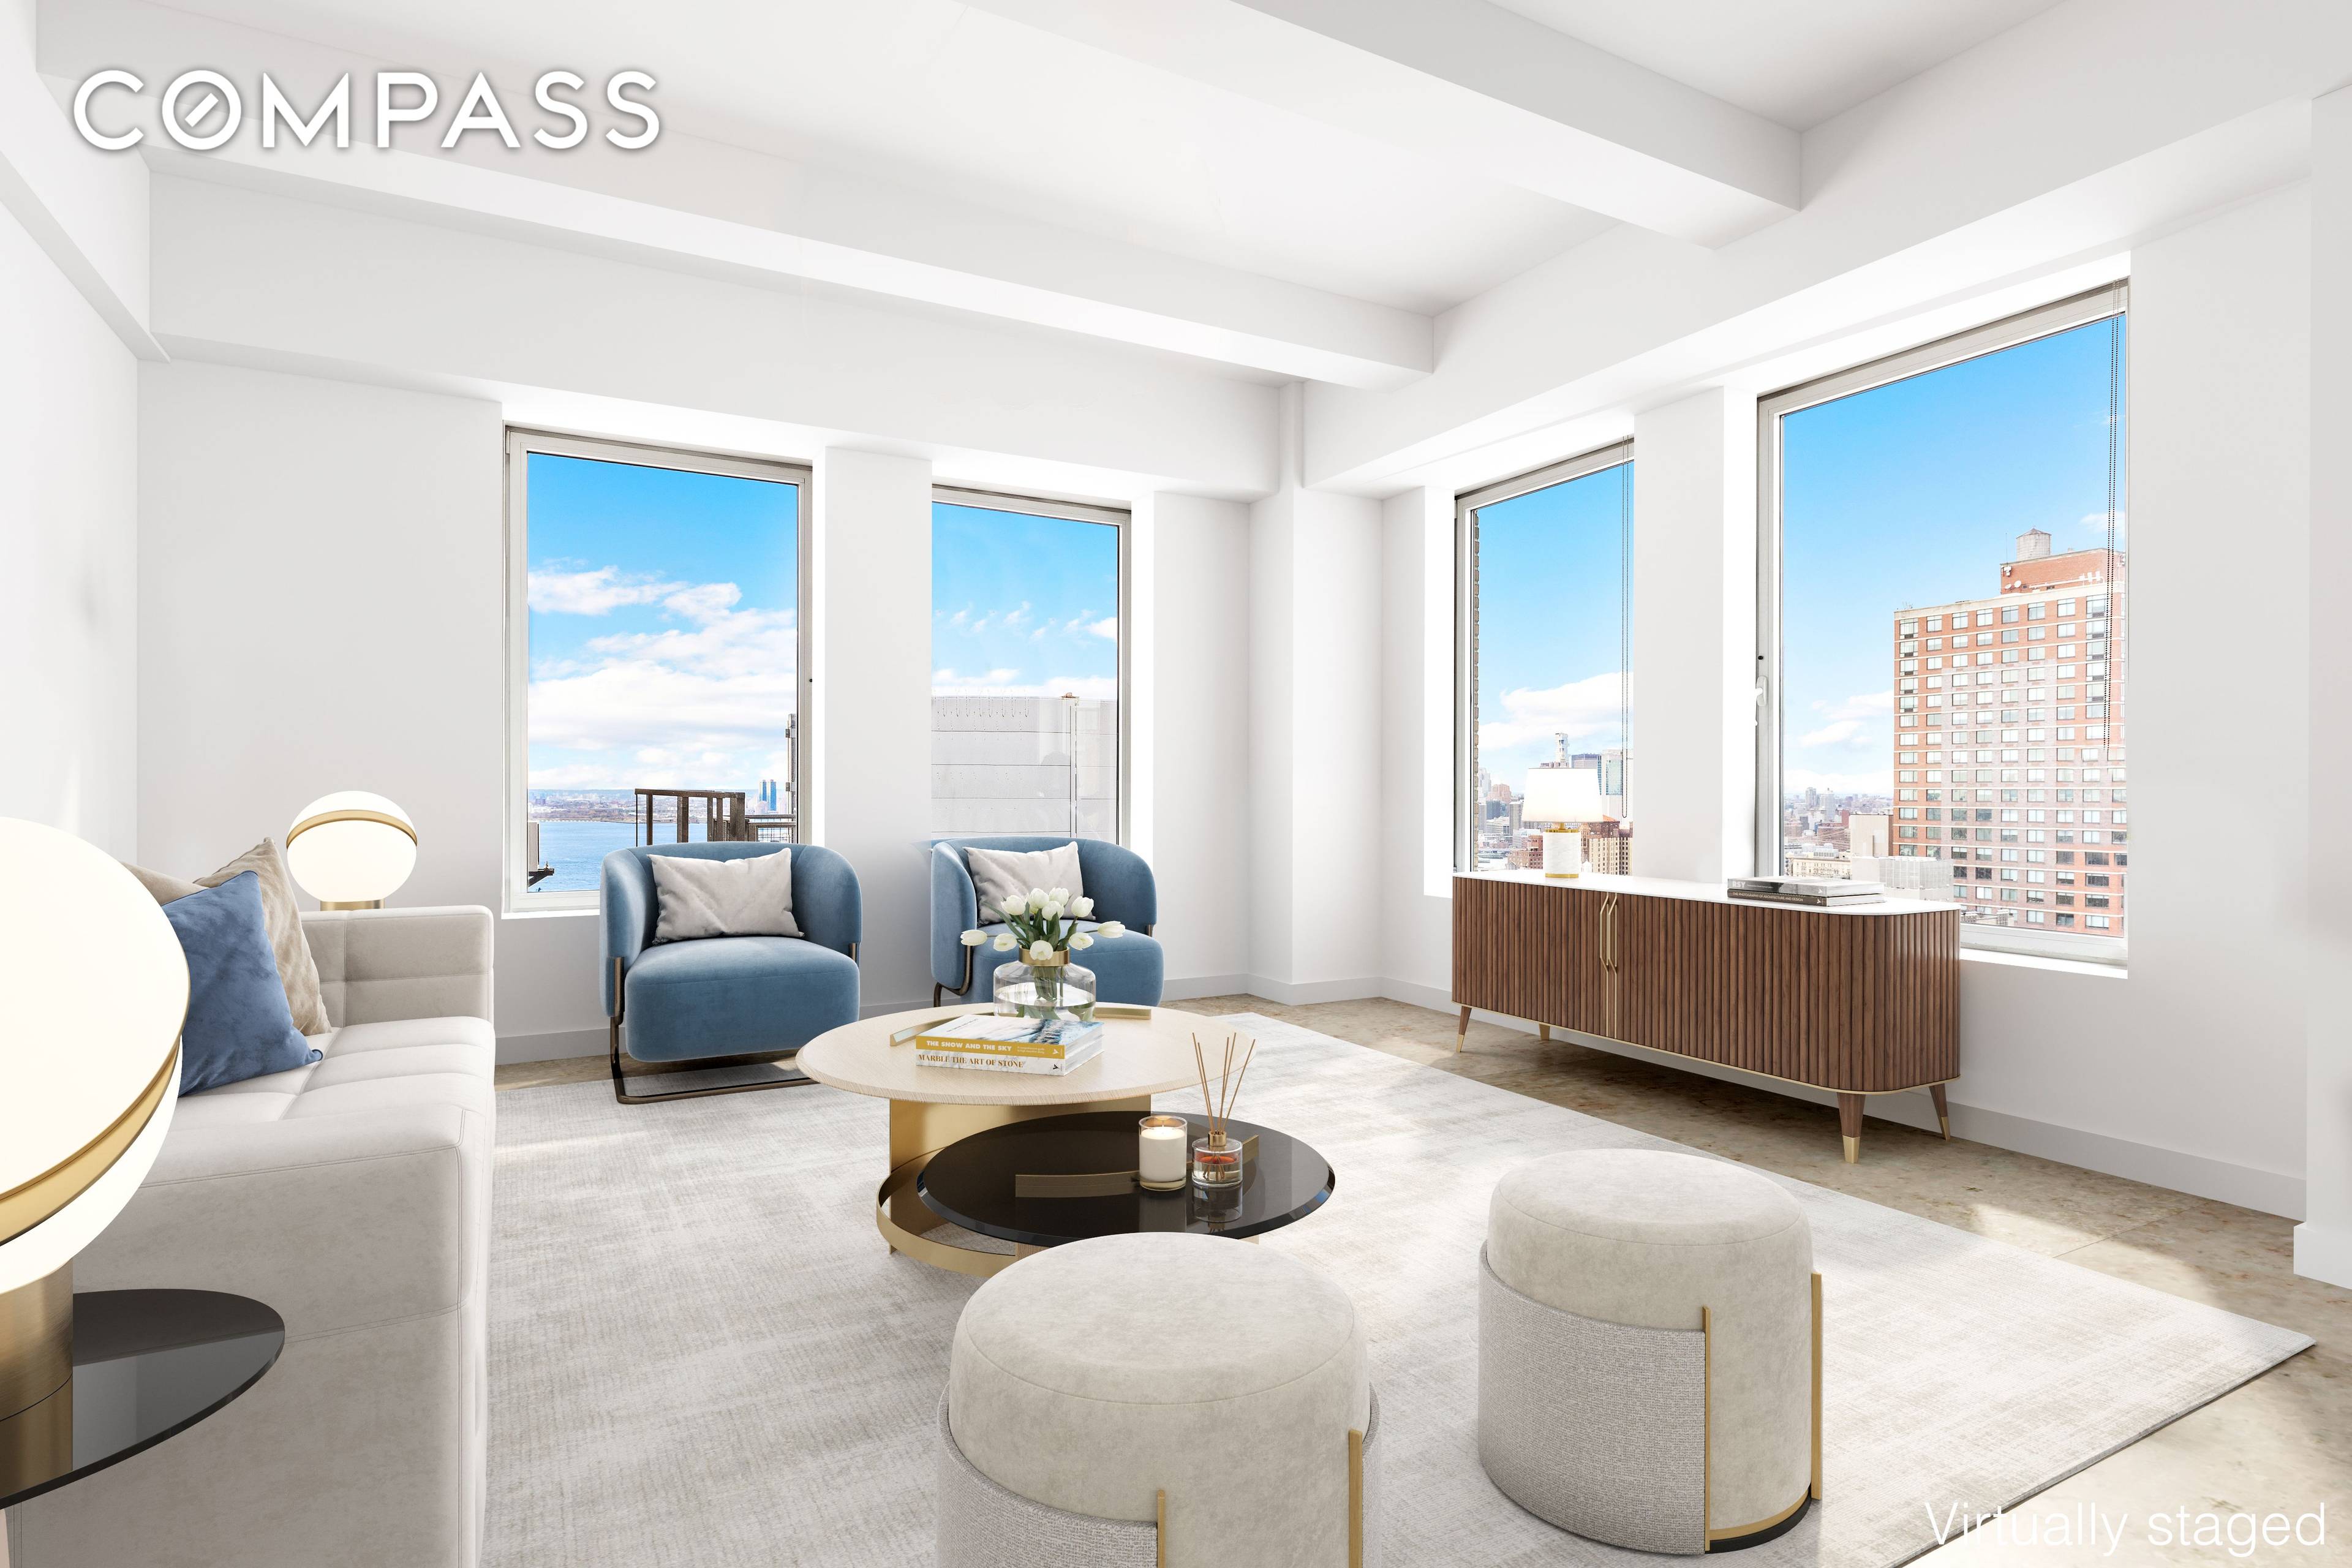 This totally STUNNING and ELEGANT 3000 square foot singular home occupies the entire 23rd floor of an architecturally noteworthy doorman full service building in Brooklyn Heights.